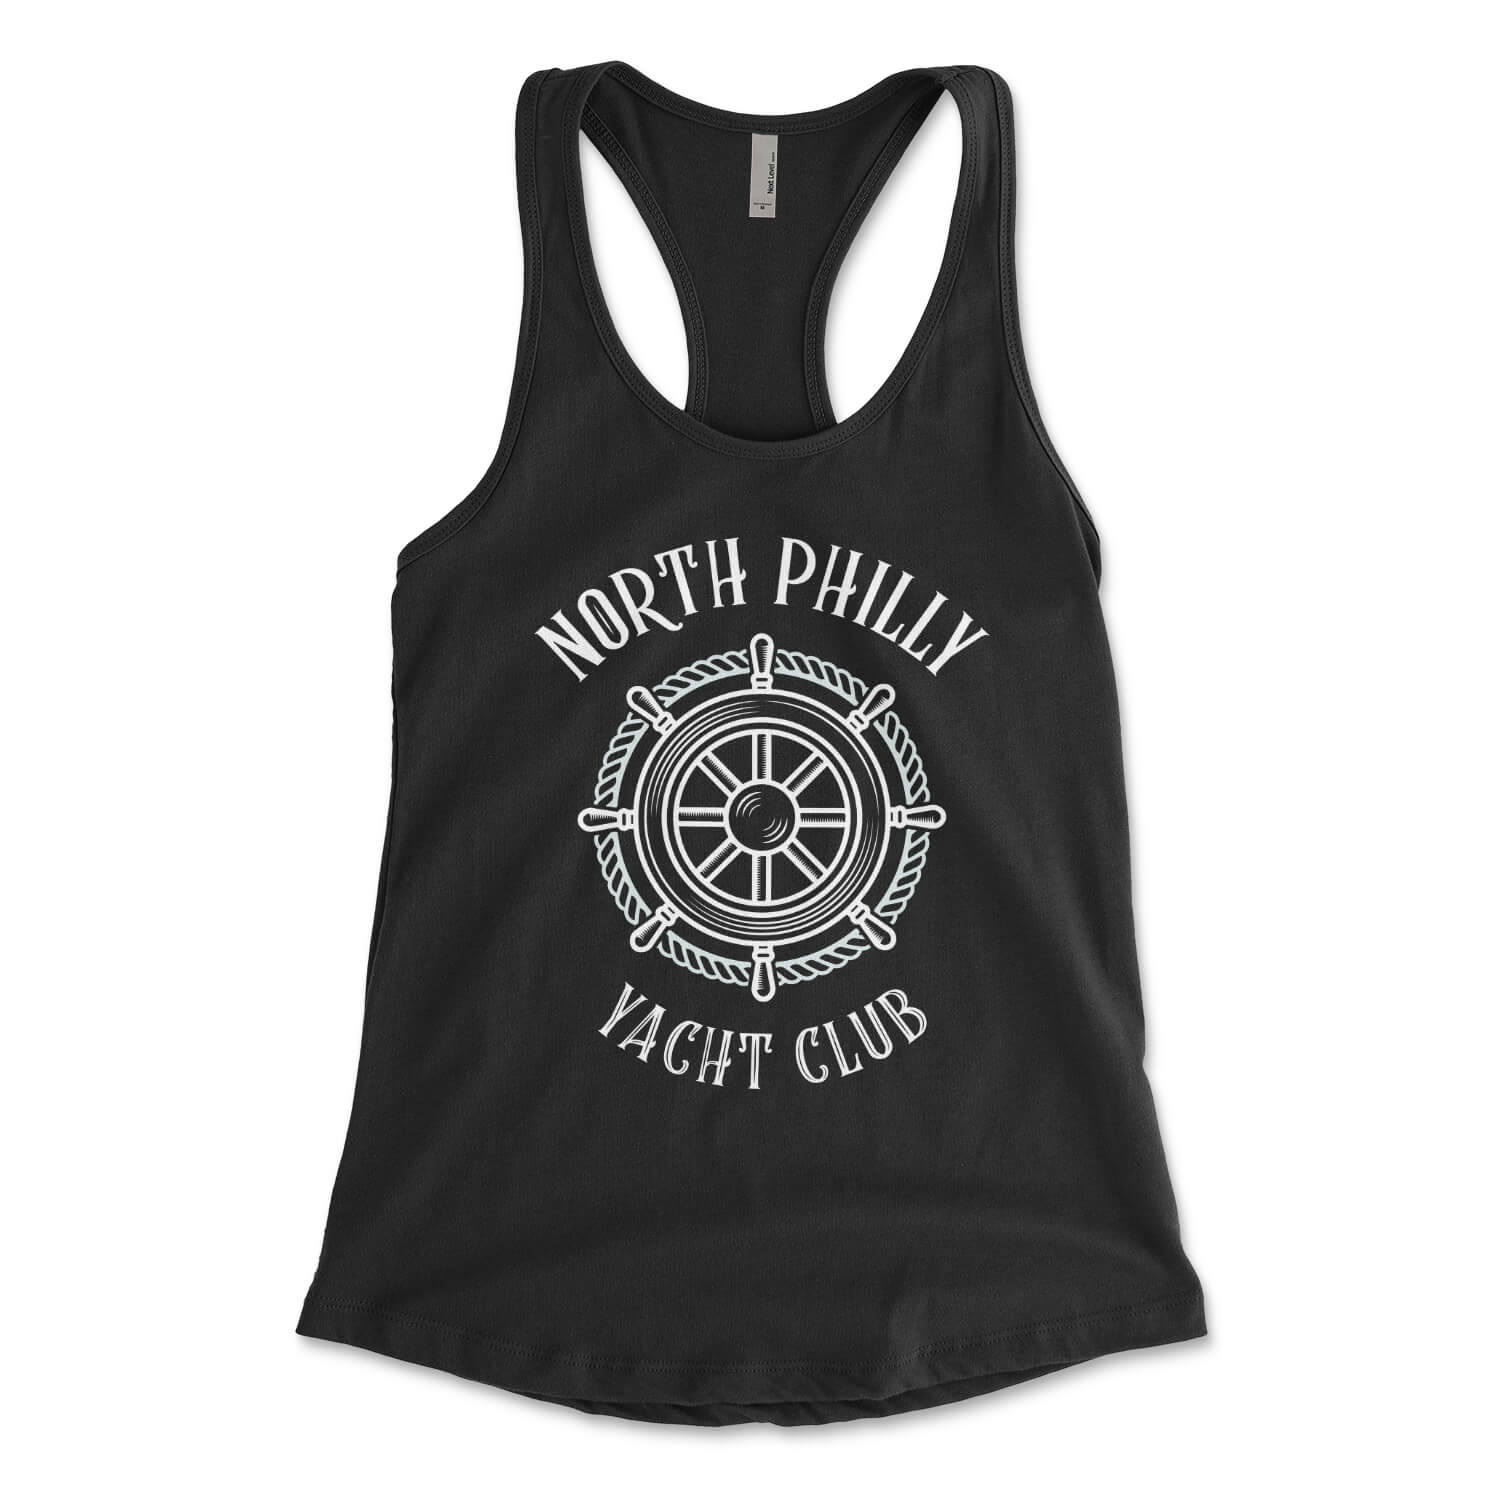 North Philly Yacht Club black womens racerback tank top from Phillygoat